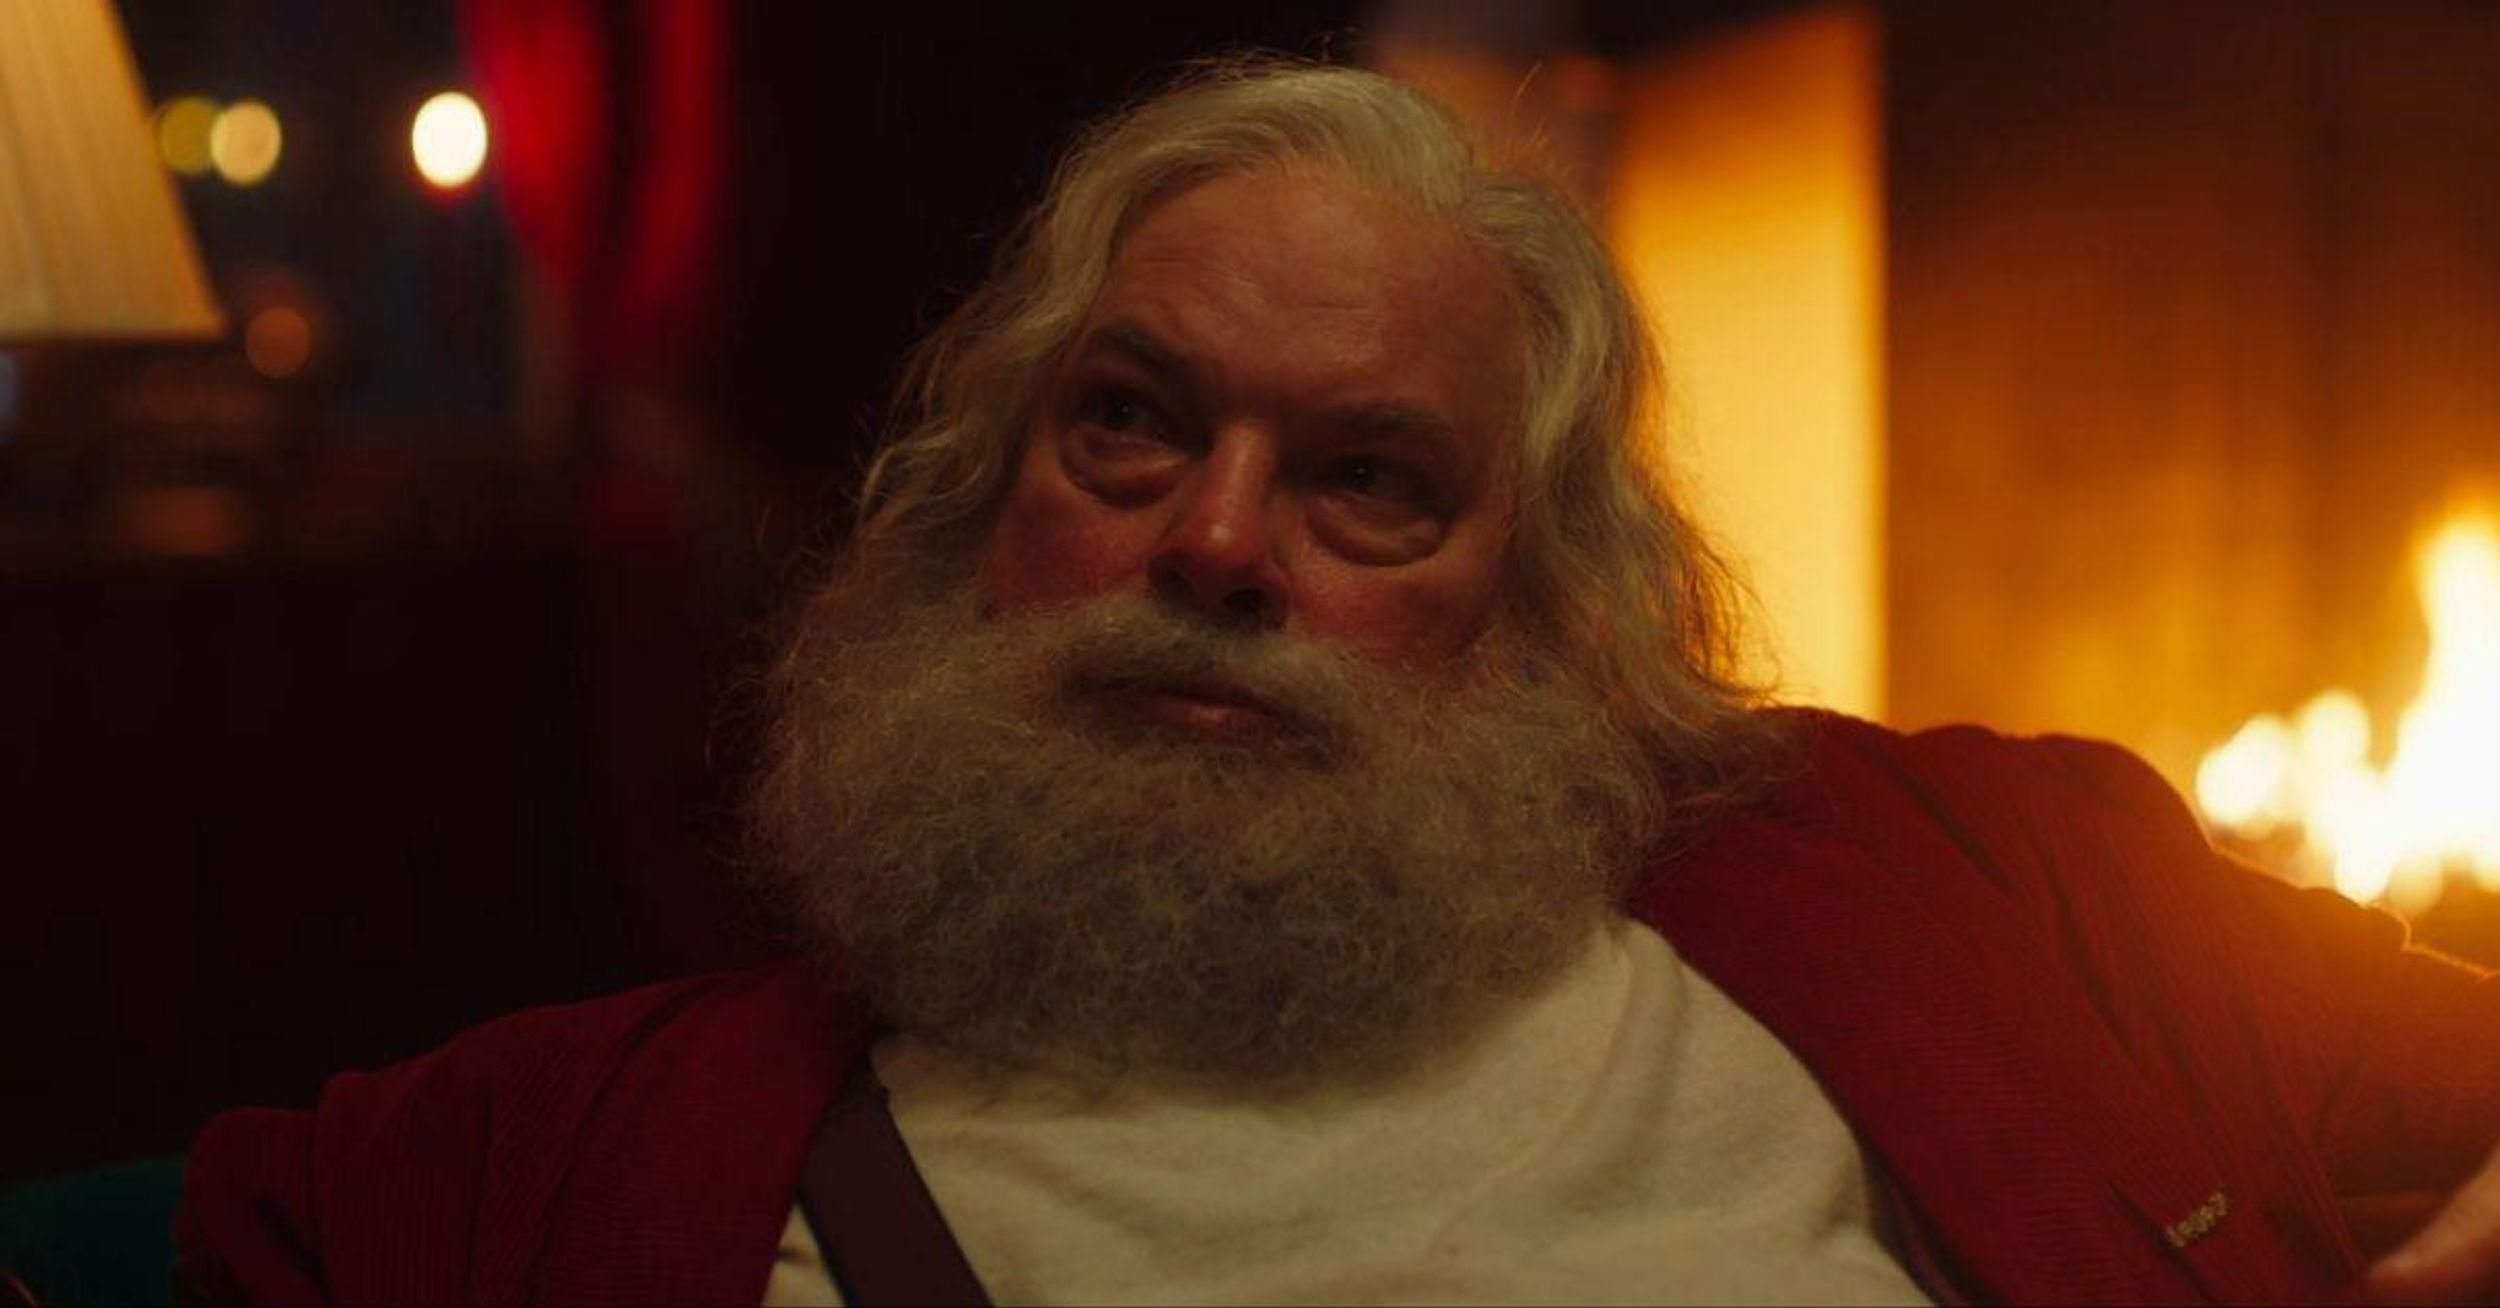 Norweigan Postal Service Trolls Trump Hard With Brilliant 'Angry White Man' Santa Commercial